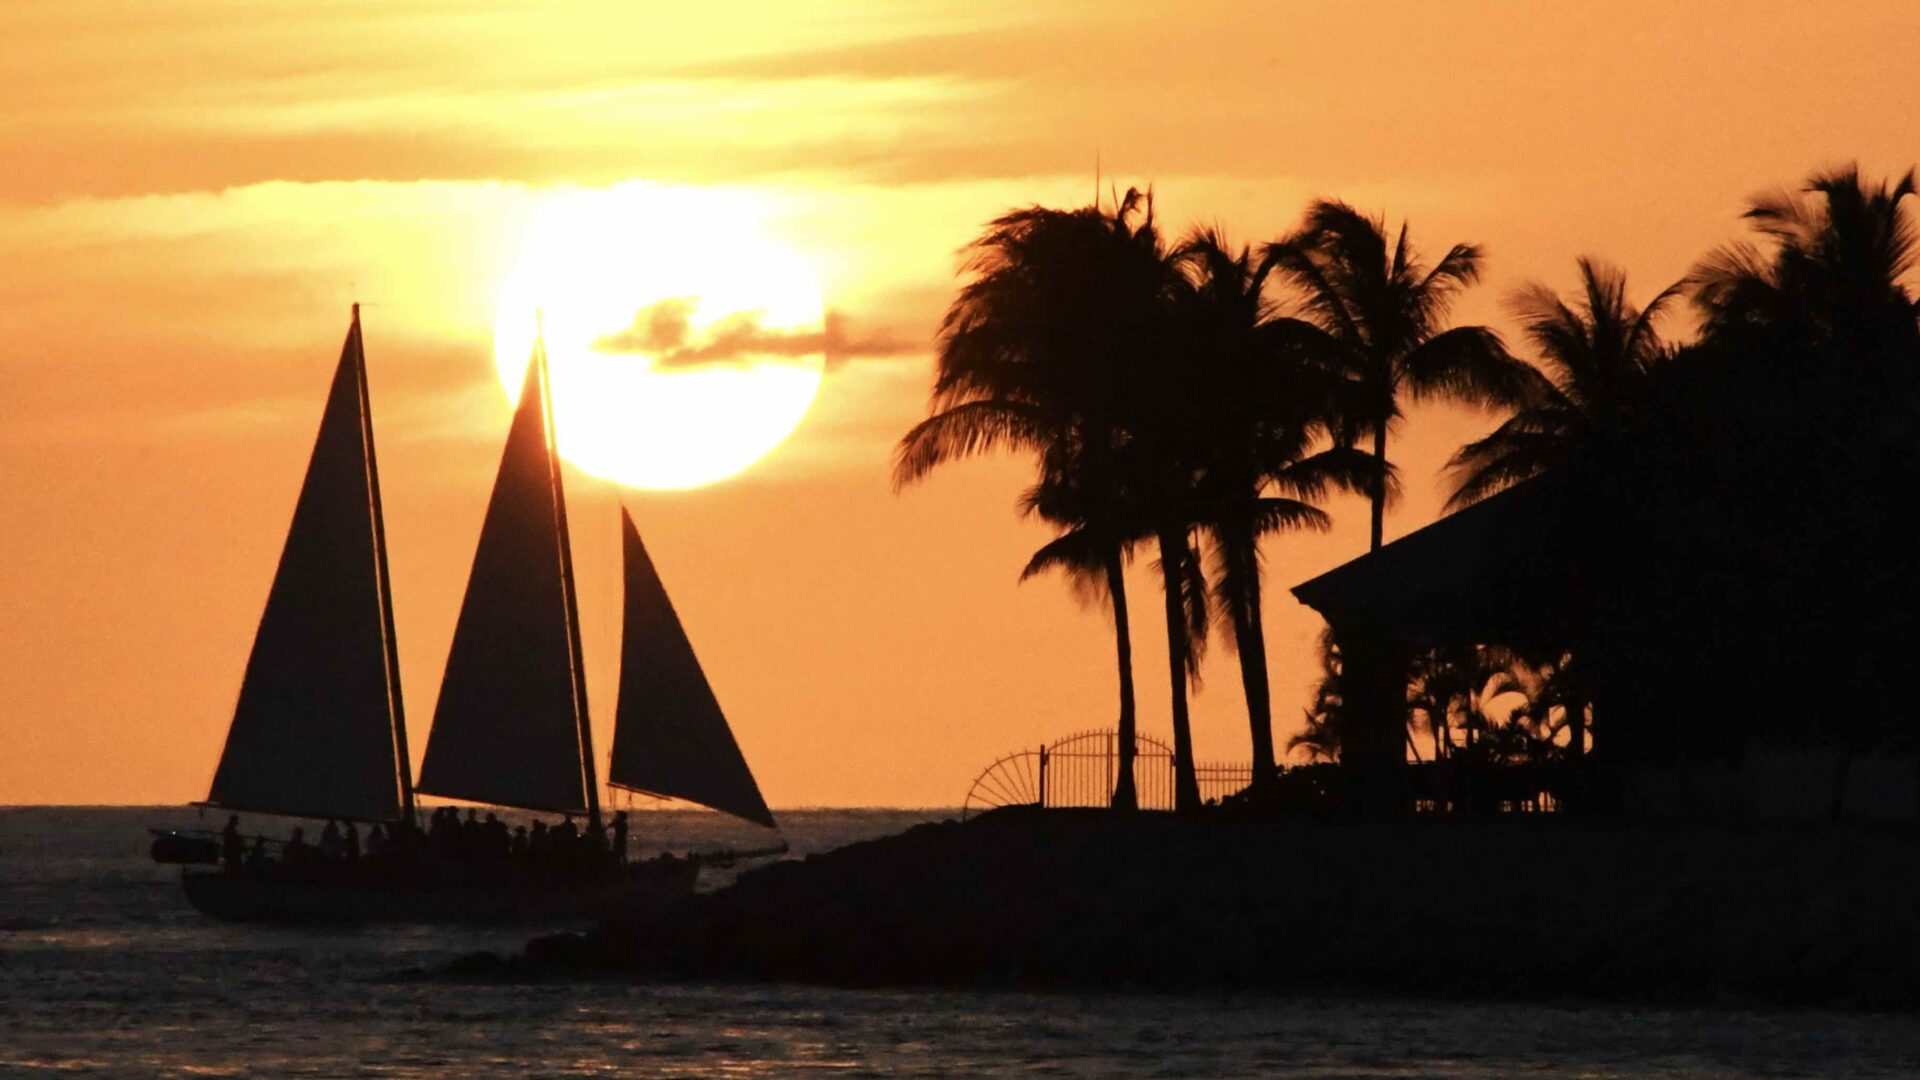 The Florida Keys are famous for its Sunset adventures in Key West